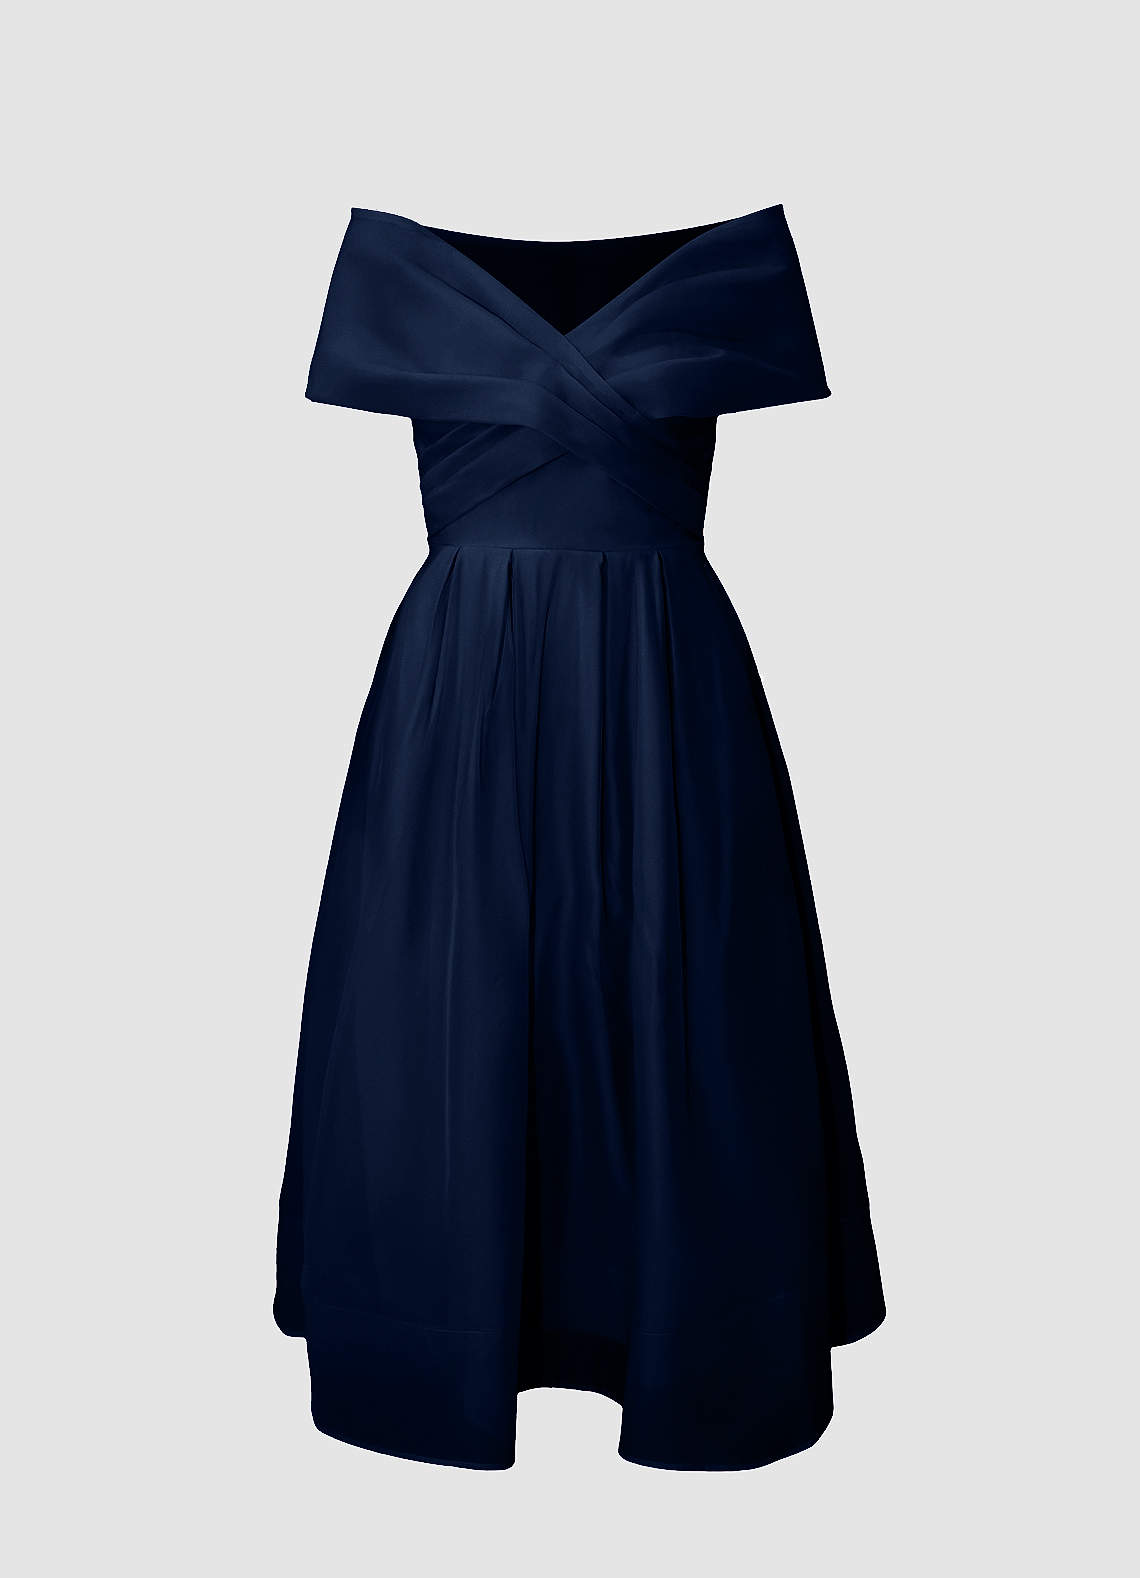 Dear To My Heart Navy Blue Off-The-Shoulder Midi Dress image1